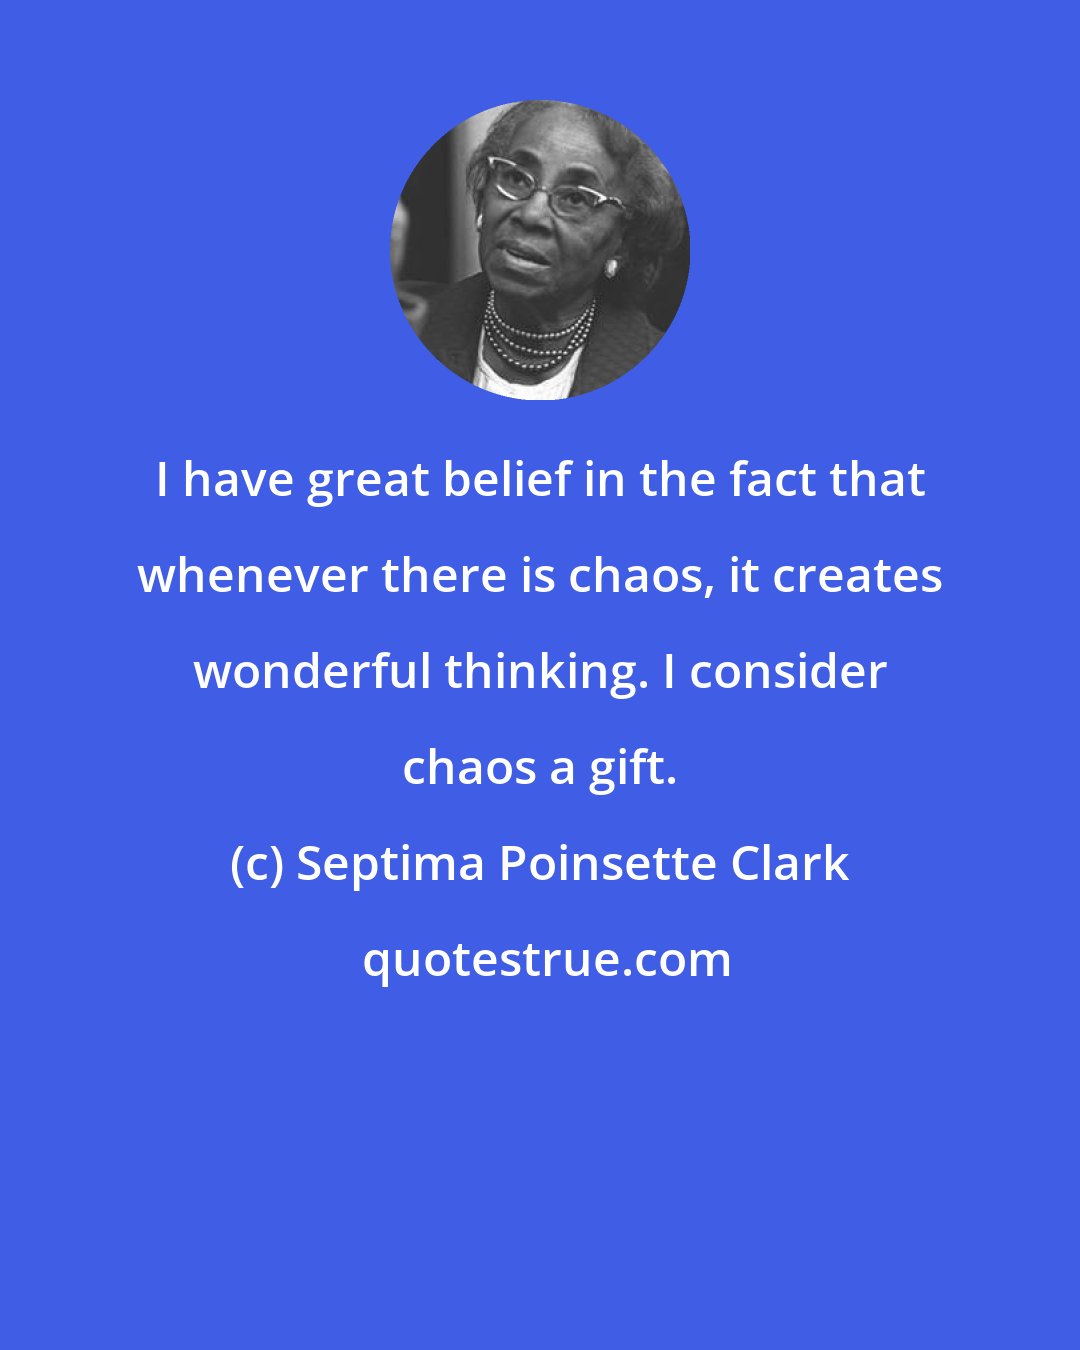 Septima Poinsette Clark: I have great belief in the fact that whenever there is chaos, it creates wonderful thinking. I consider chaos a gift.